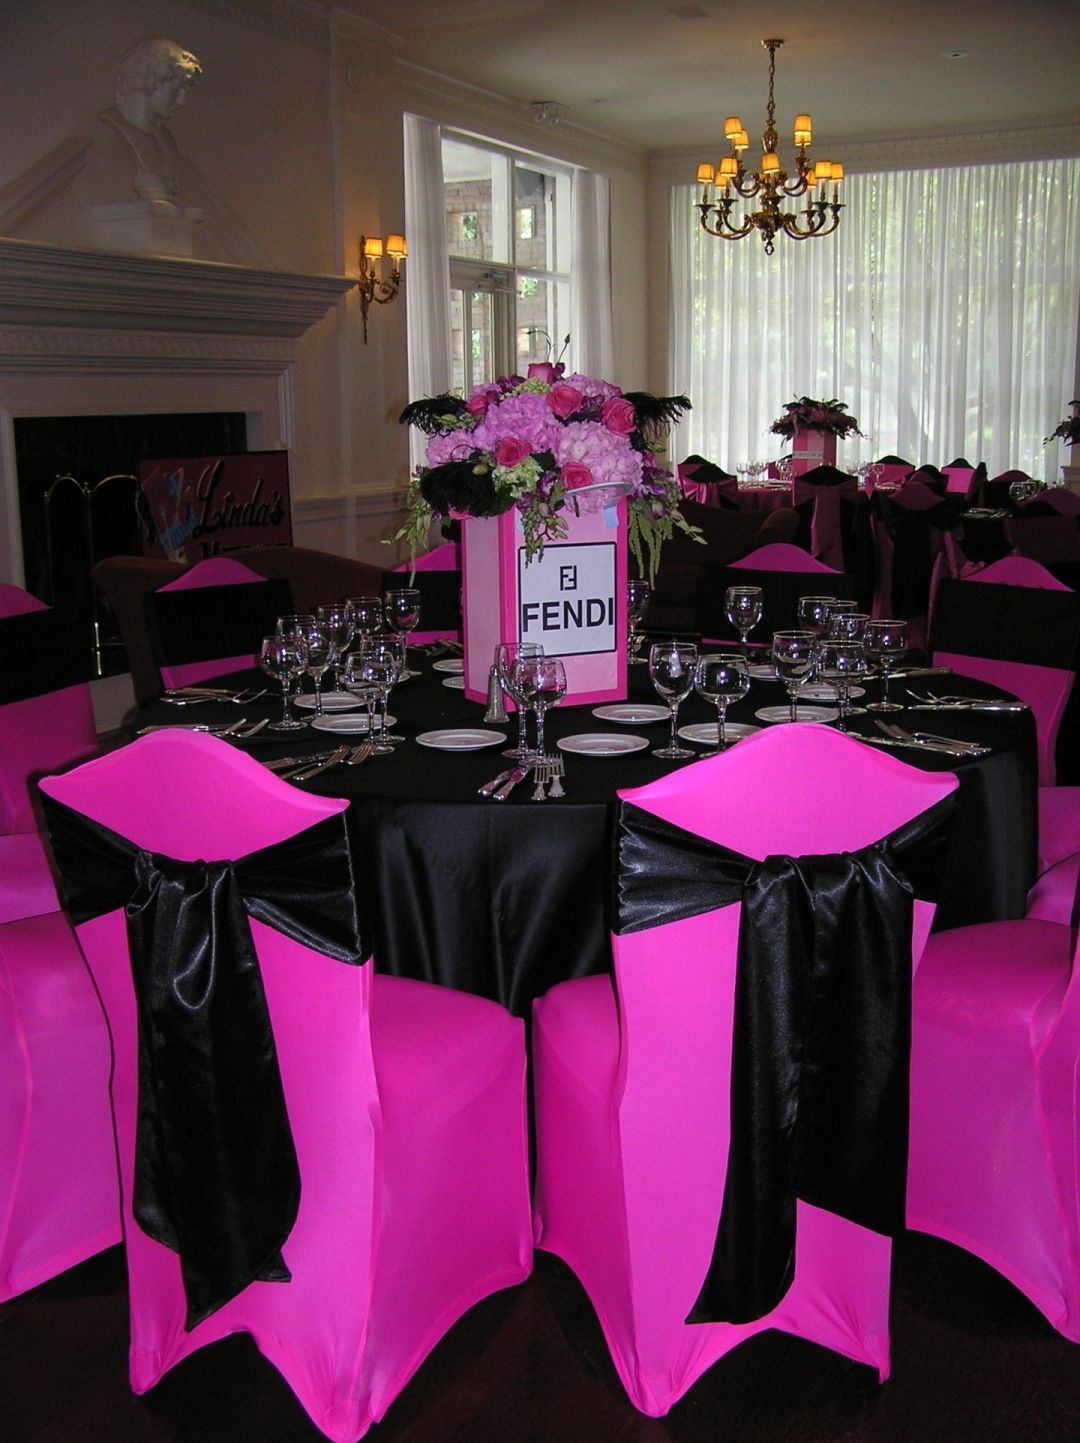 Room Gallery – The Finishing Touch  Hot pink weddings, Silver